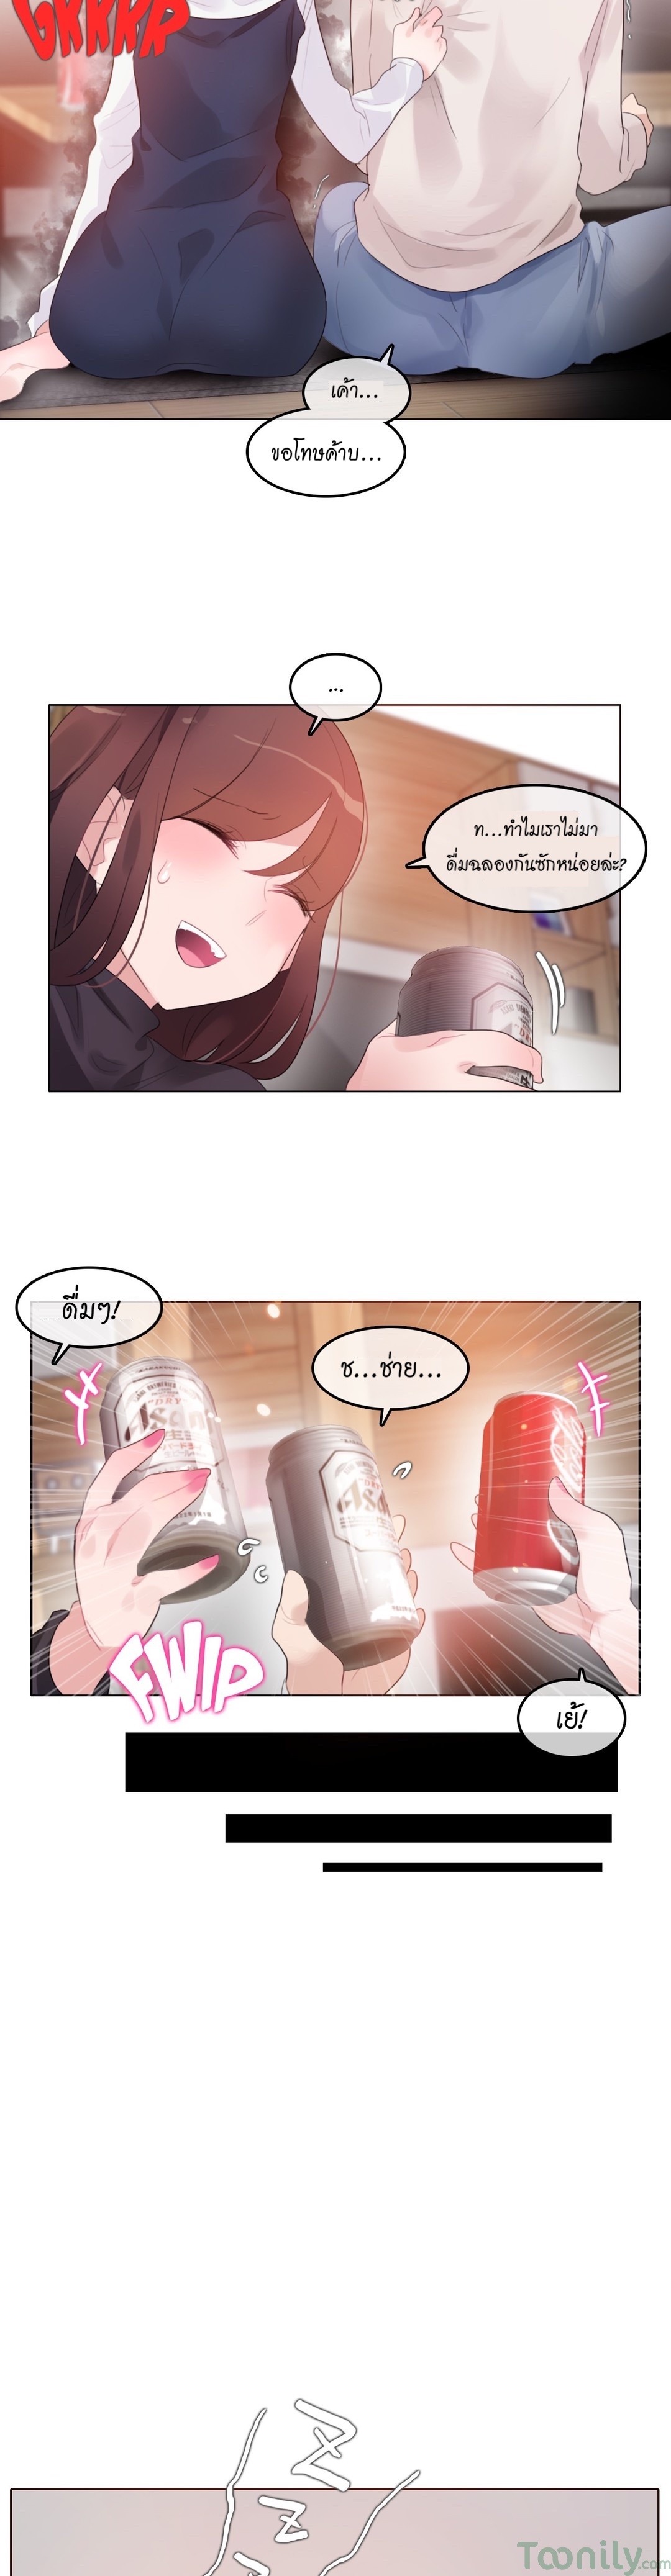 A Pervert’s Daily Life62 (3)